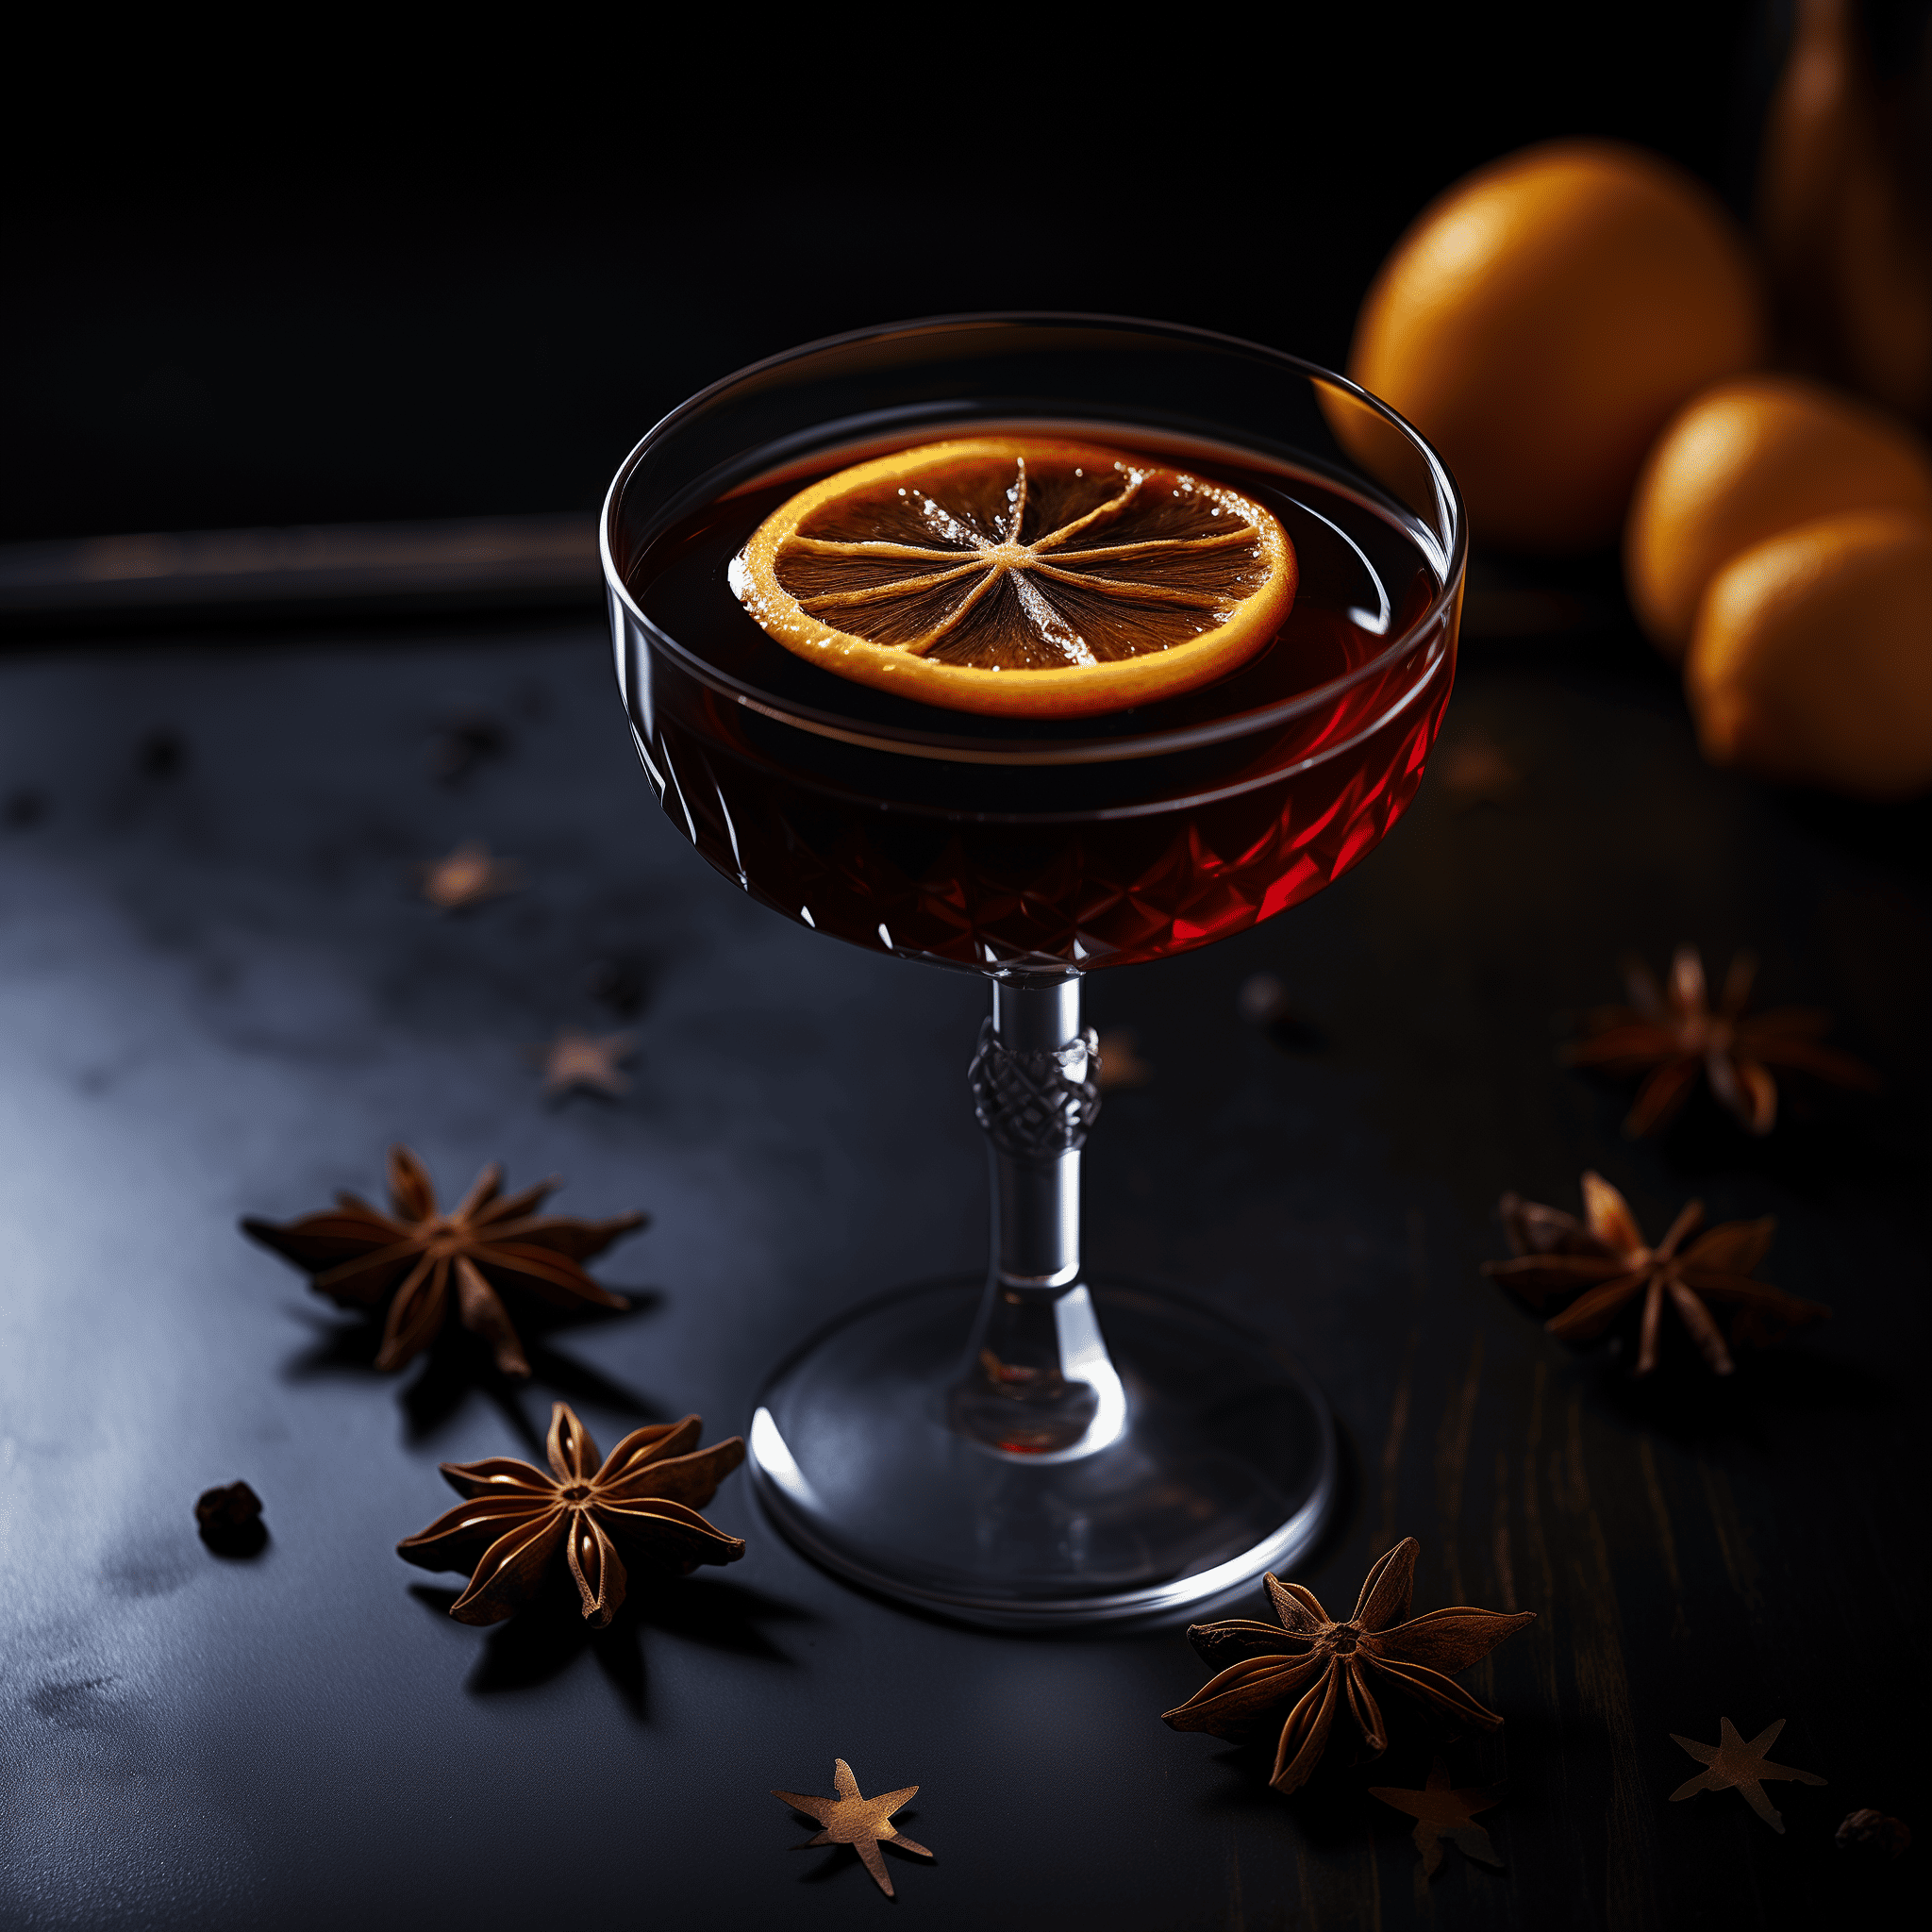 Black Mamba Cocktail Recipe - The Black Mamba cocktail offers a complex flavor profile. It's a harmonious blend of herbal, fruity, and slightly bitter notes, with a warming sensation from the mulled wine and a crisp finish thanks to the lemon.